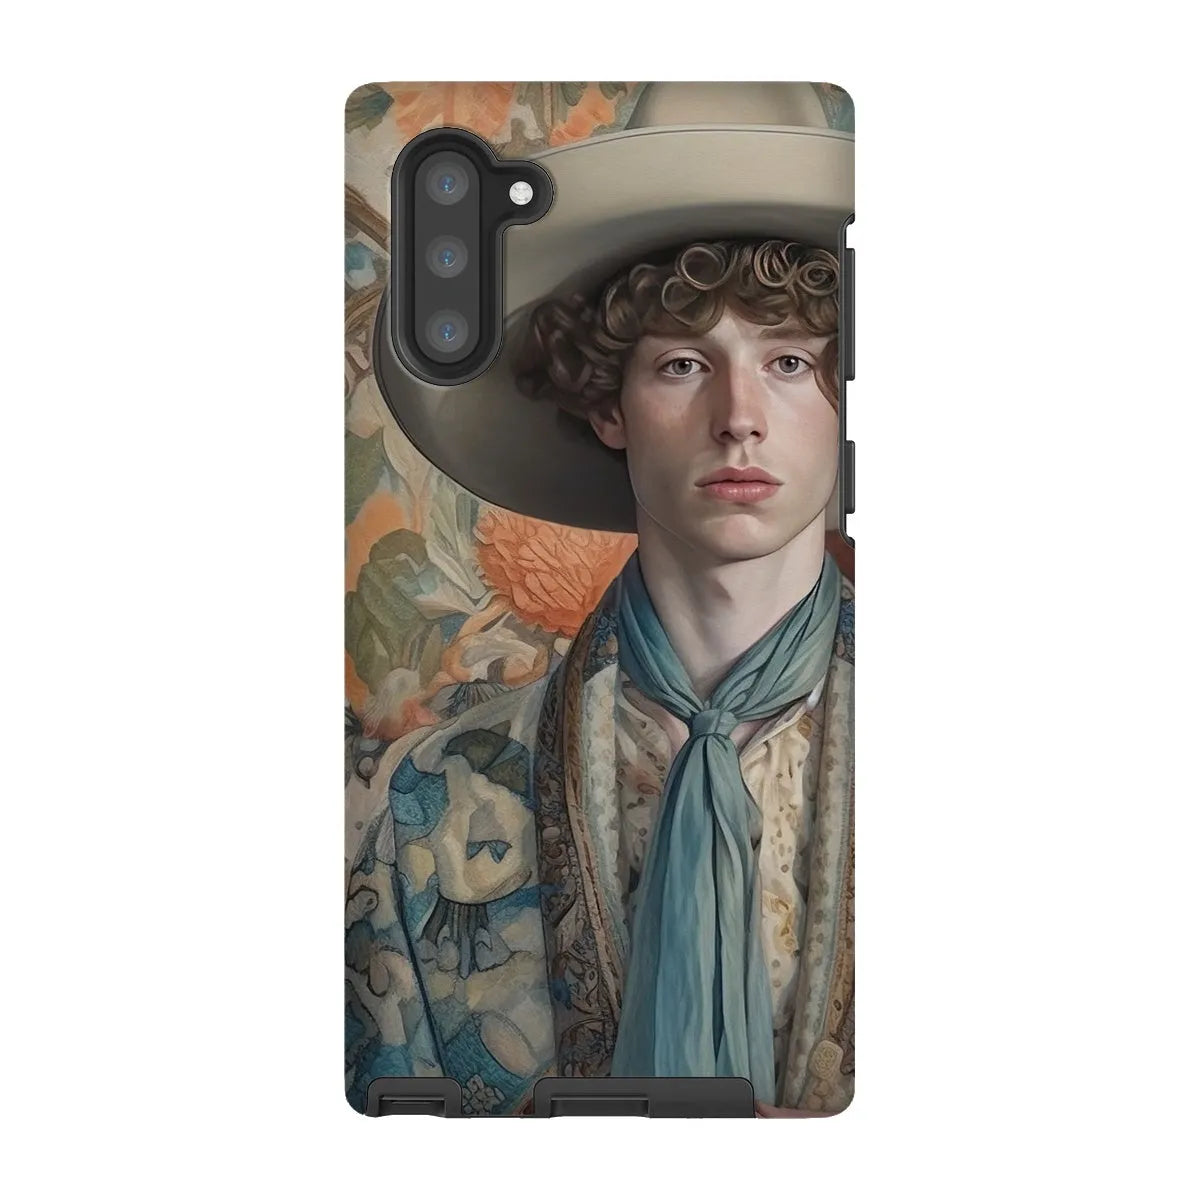 Theodore The Gay Cowboy - Dandy Gay Men Art Phone Case - Samsung Galaxy Note 10 / Matte - Mobile Phone Cases